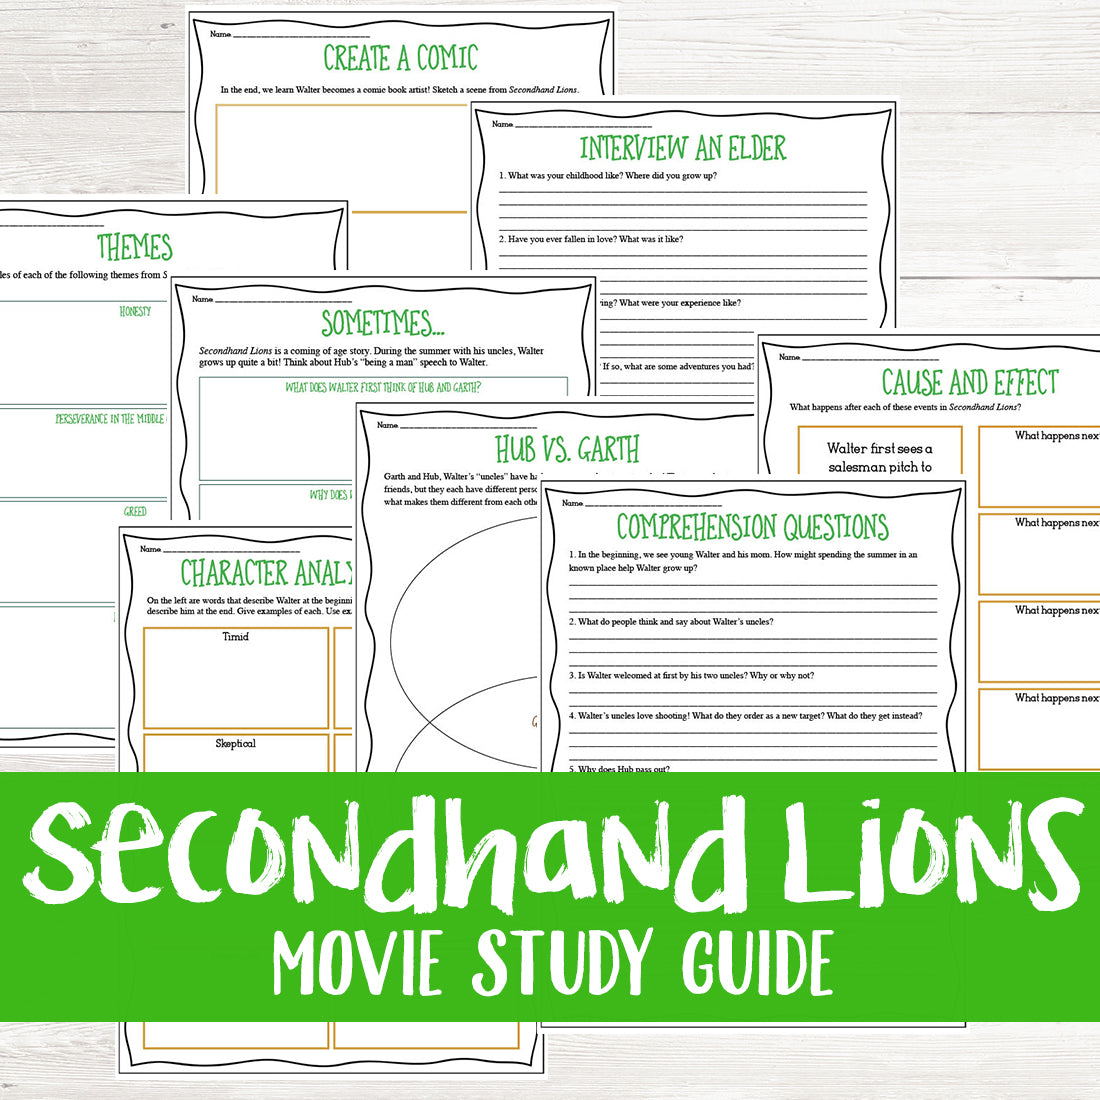 Secondhand Lions Movie Review